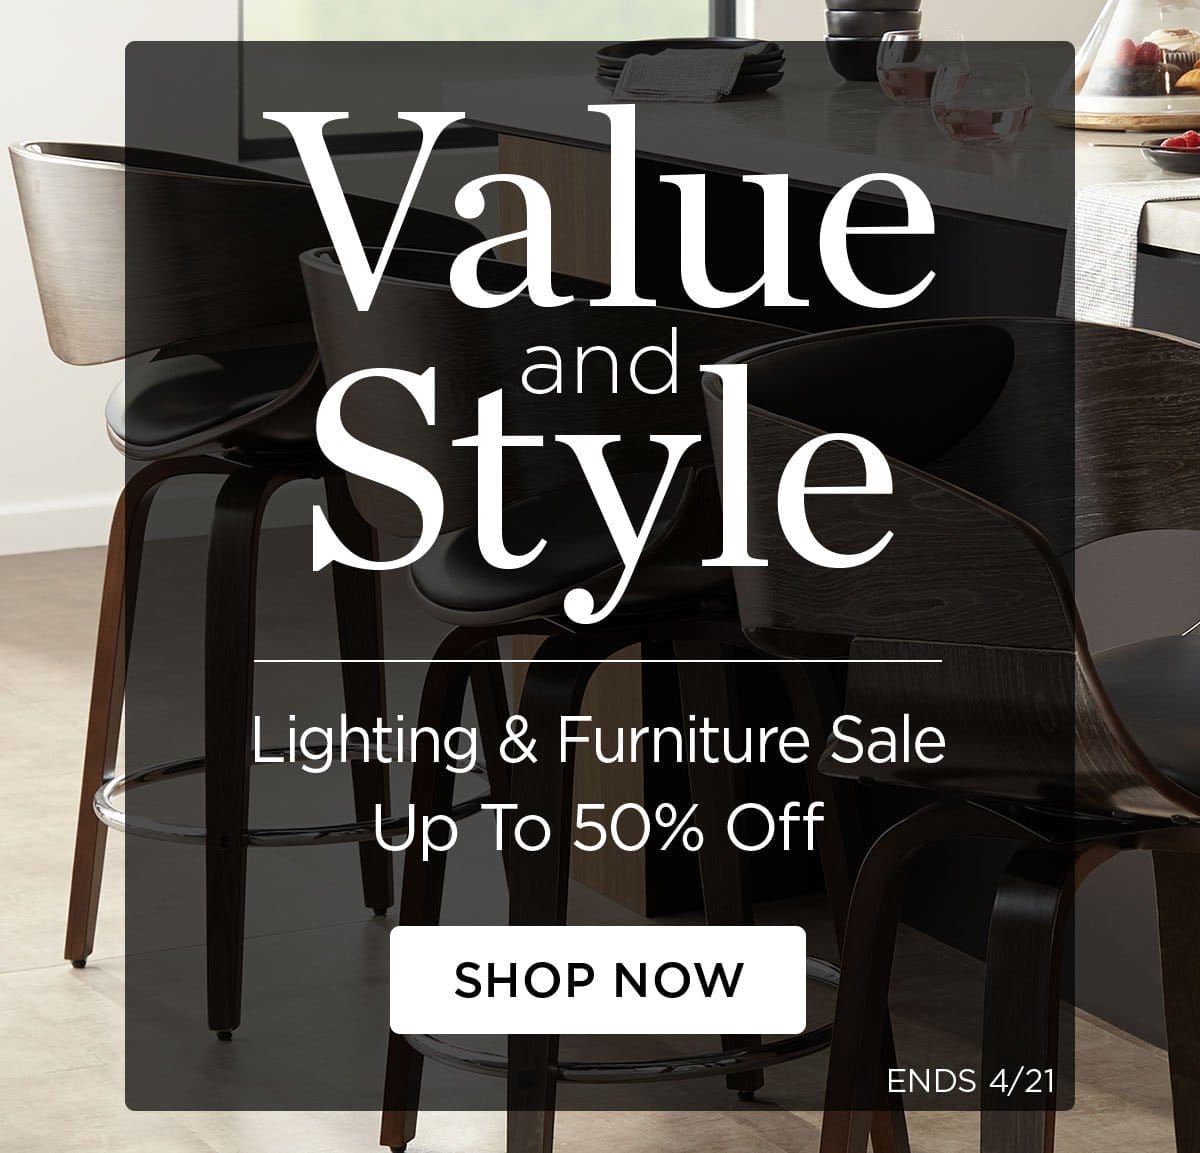 Value & Style - Lighting & Furniture Sale Up to 50% Off - Shop Now - Ends 4/21